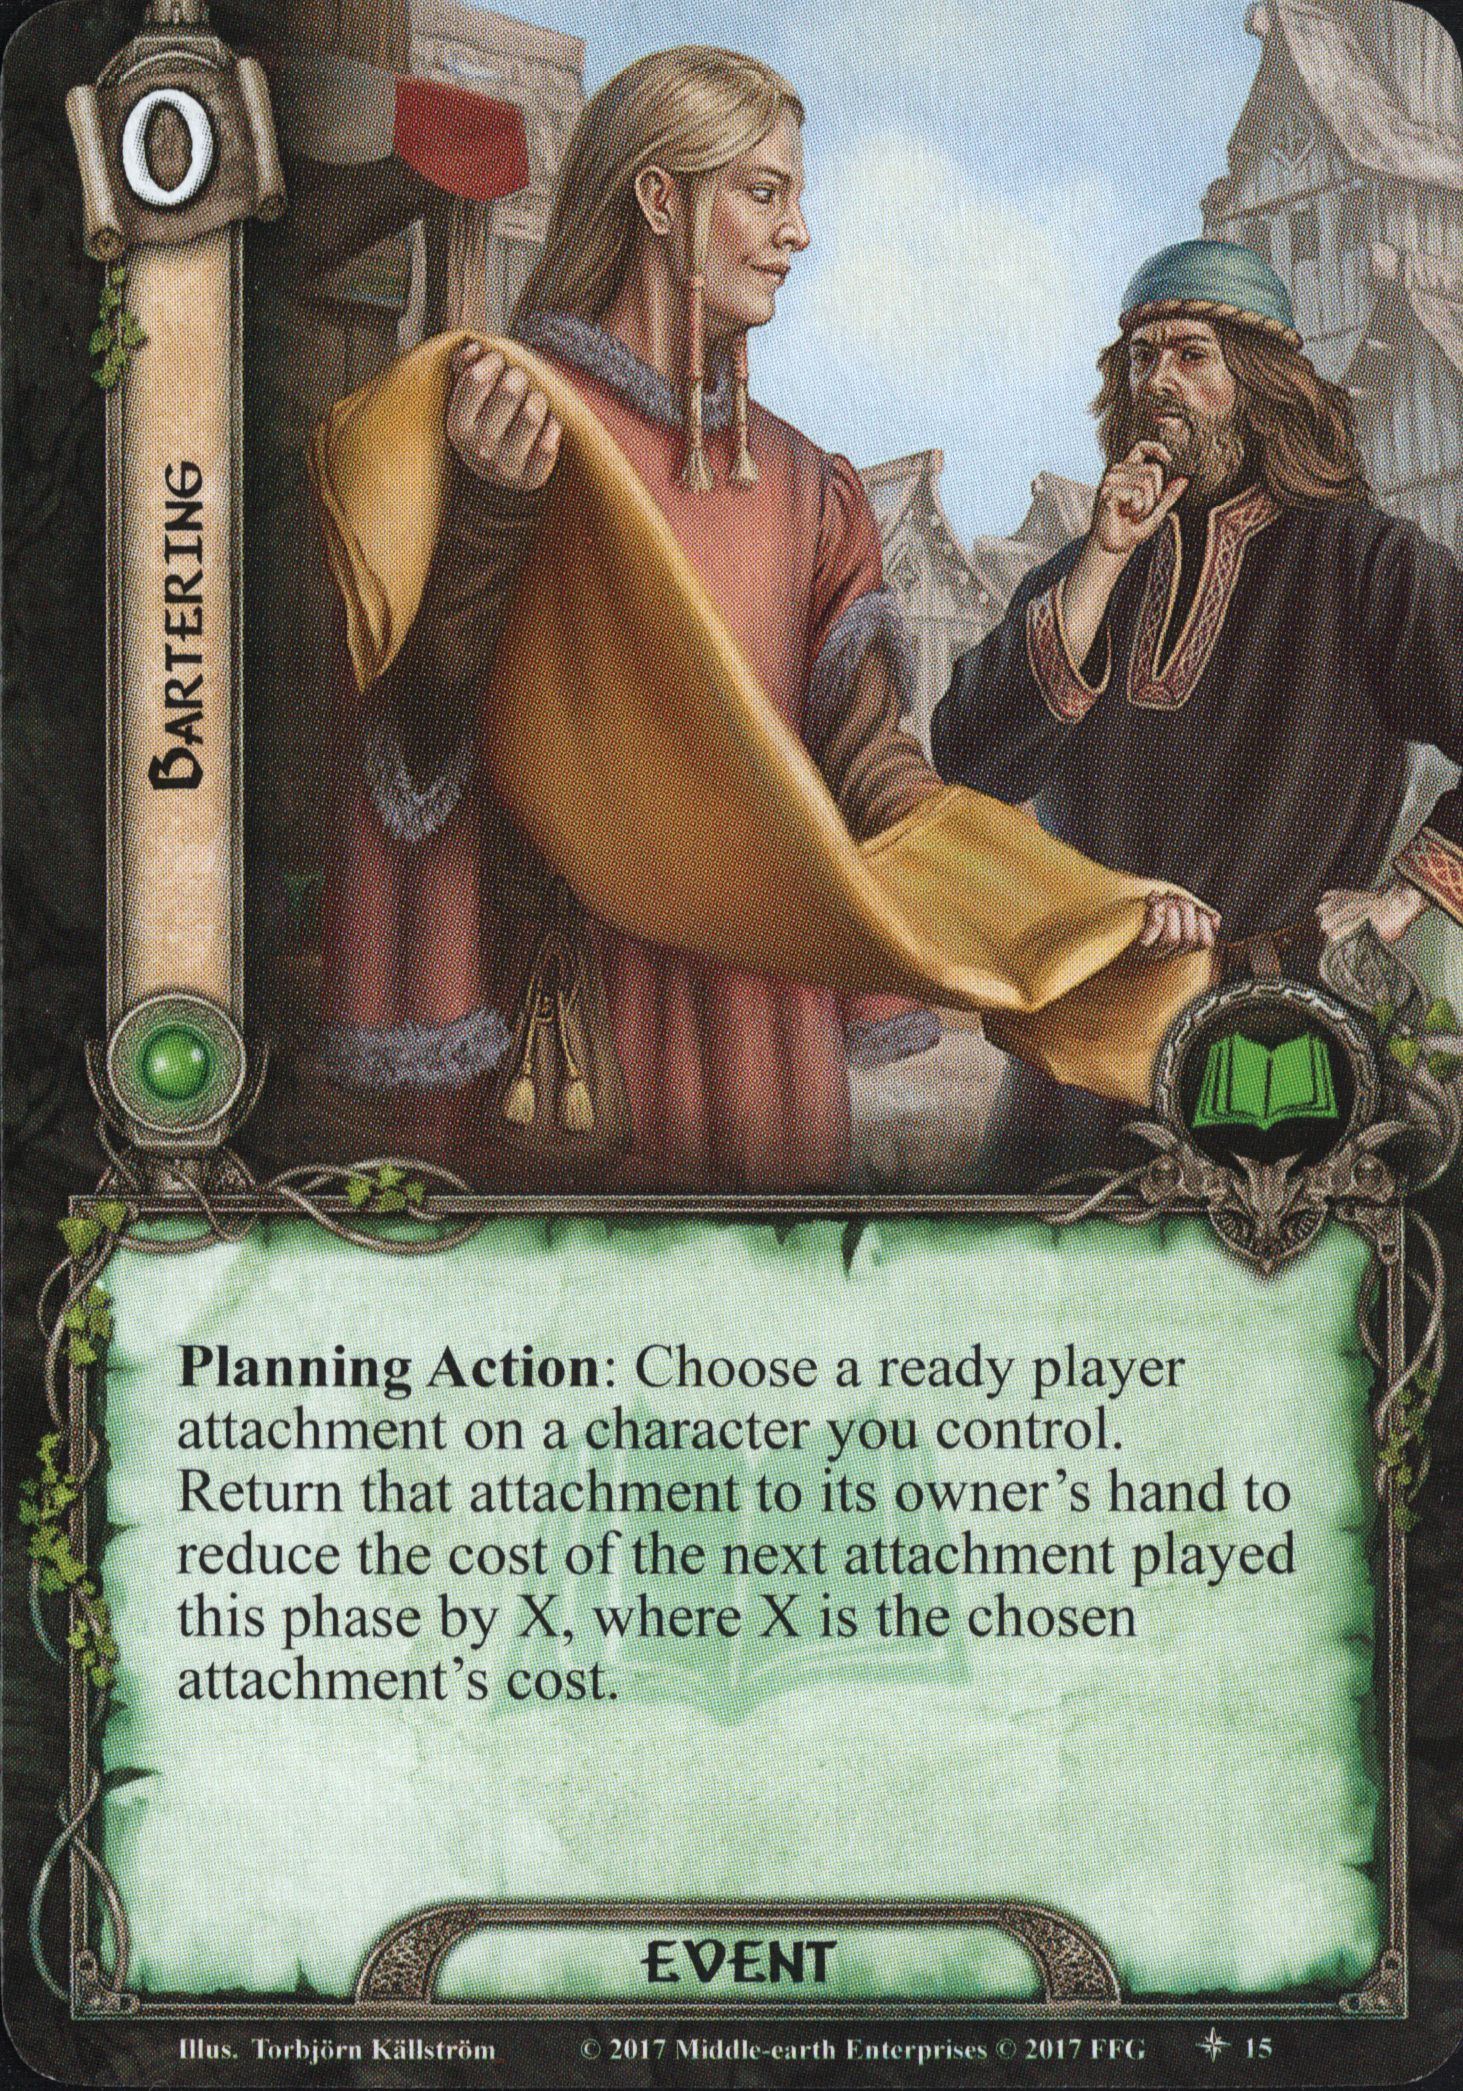 Bartering - Lore Event - 0 cost - Planning Action: Choose a ready player attachment on a character you control. Return that attachment to its owner's hand to reduce the cost of the next attachment played this phase by X, where X is the chosen attachment's cost.